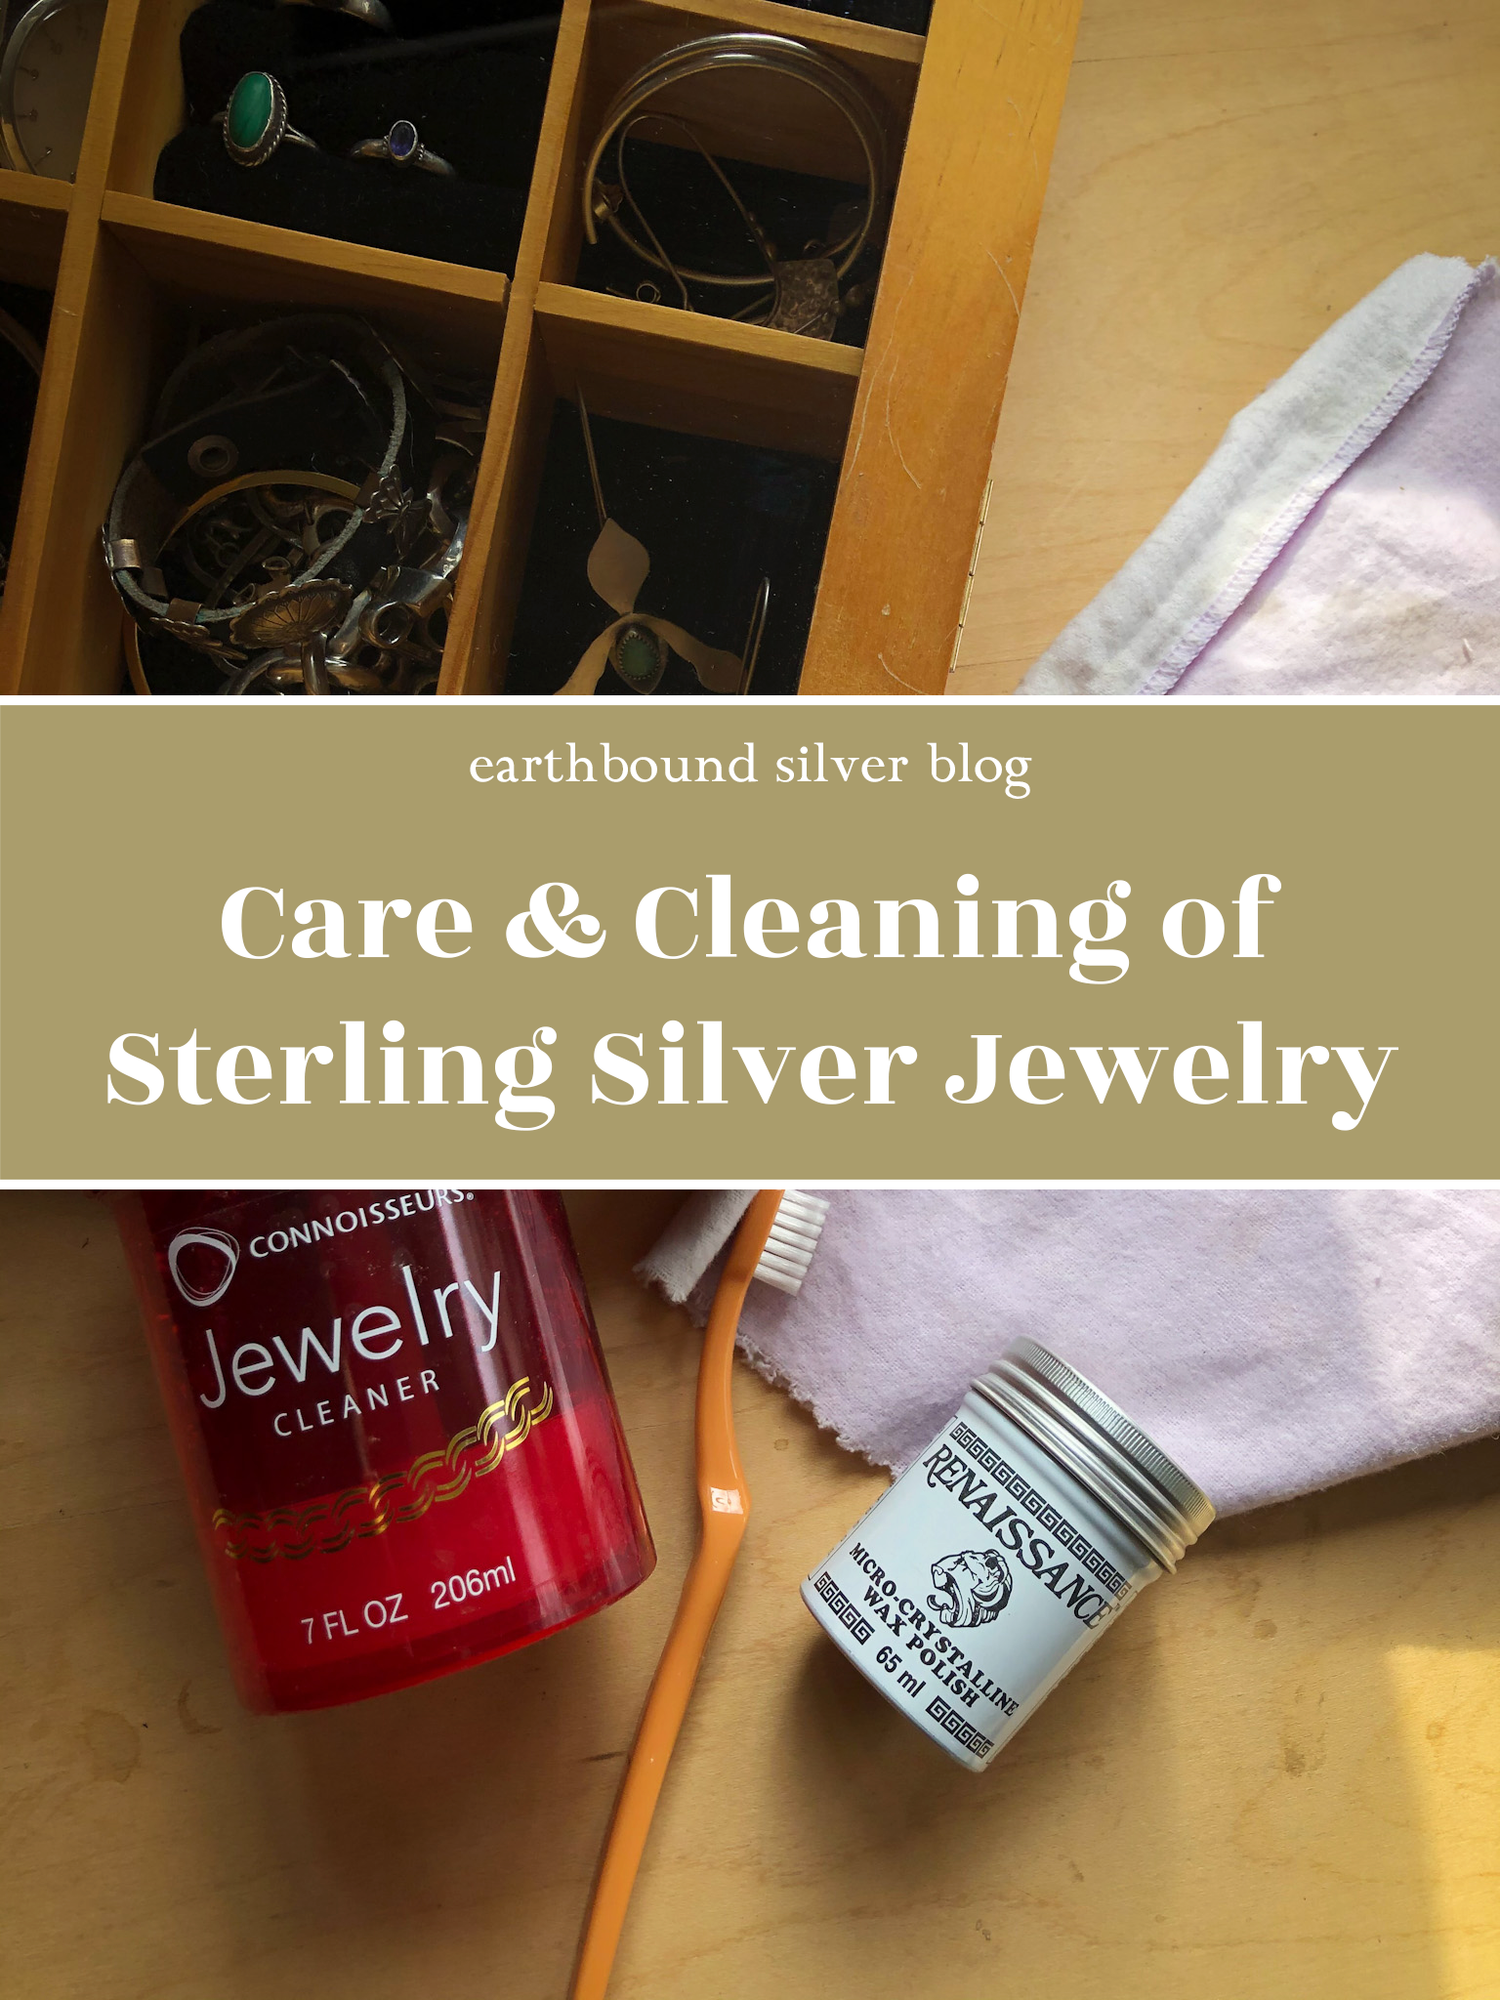 How to Clean White Gold - Connoisseurs Jewelry Cleaner